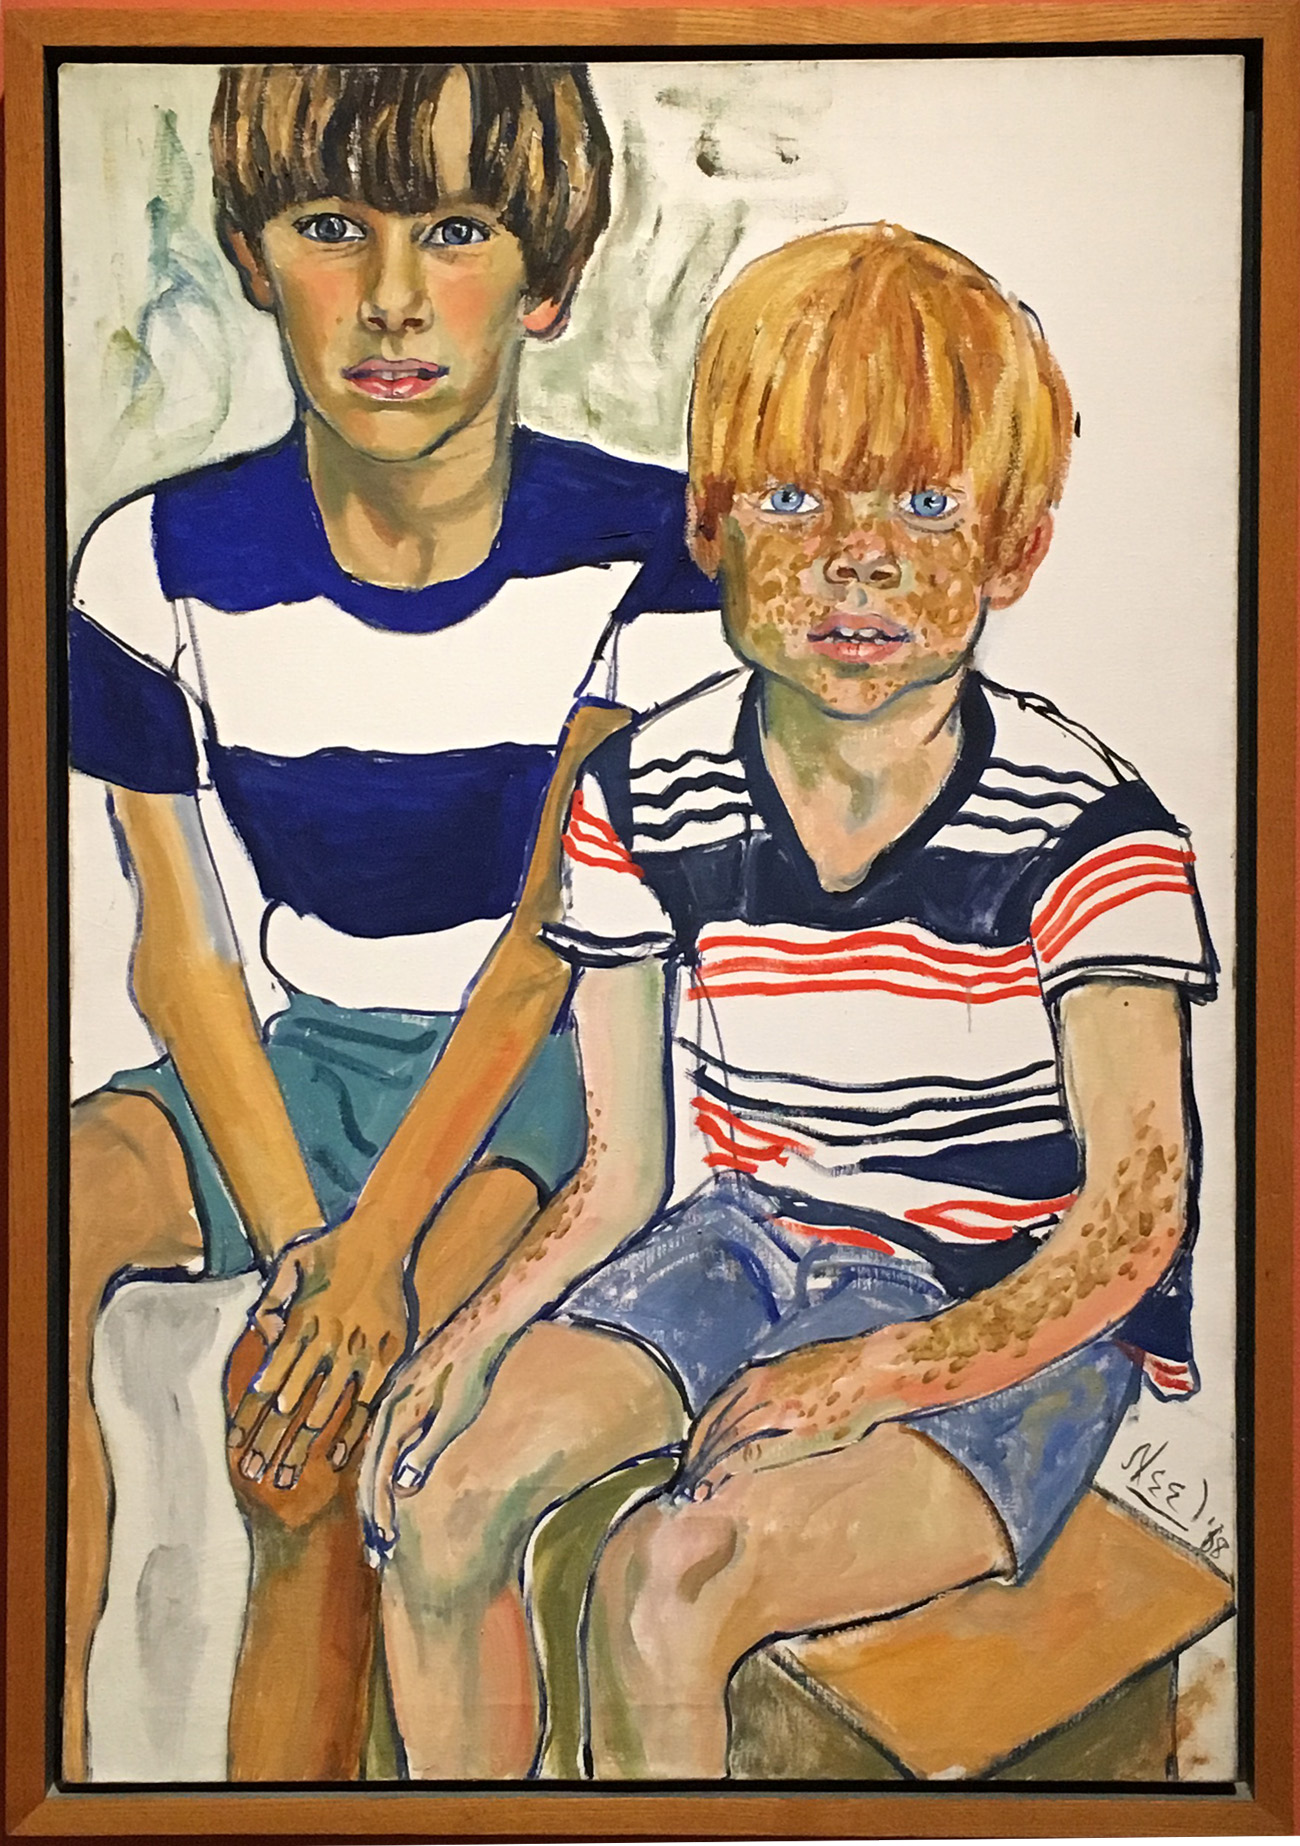 Alice Neel, “John and Joey Priestly” (1968), Oil on canvas, Courtesy Sheldon Museum of Art